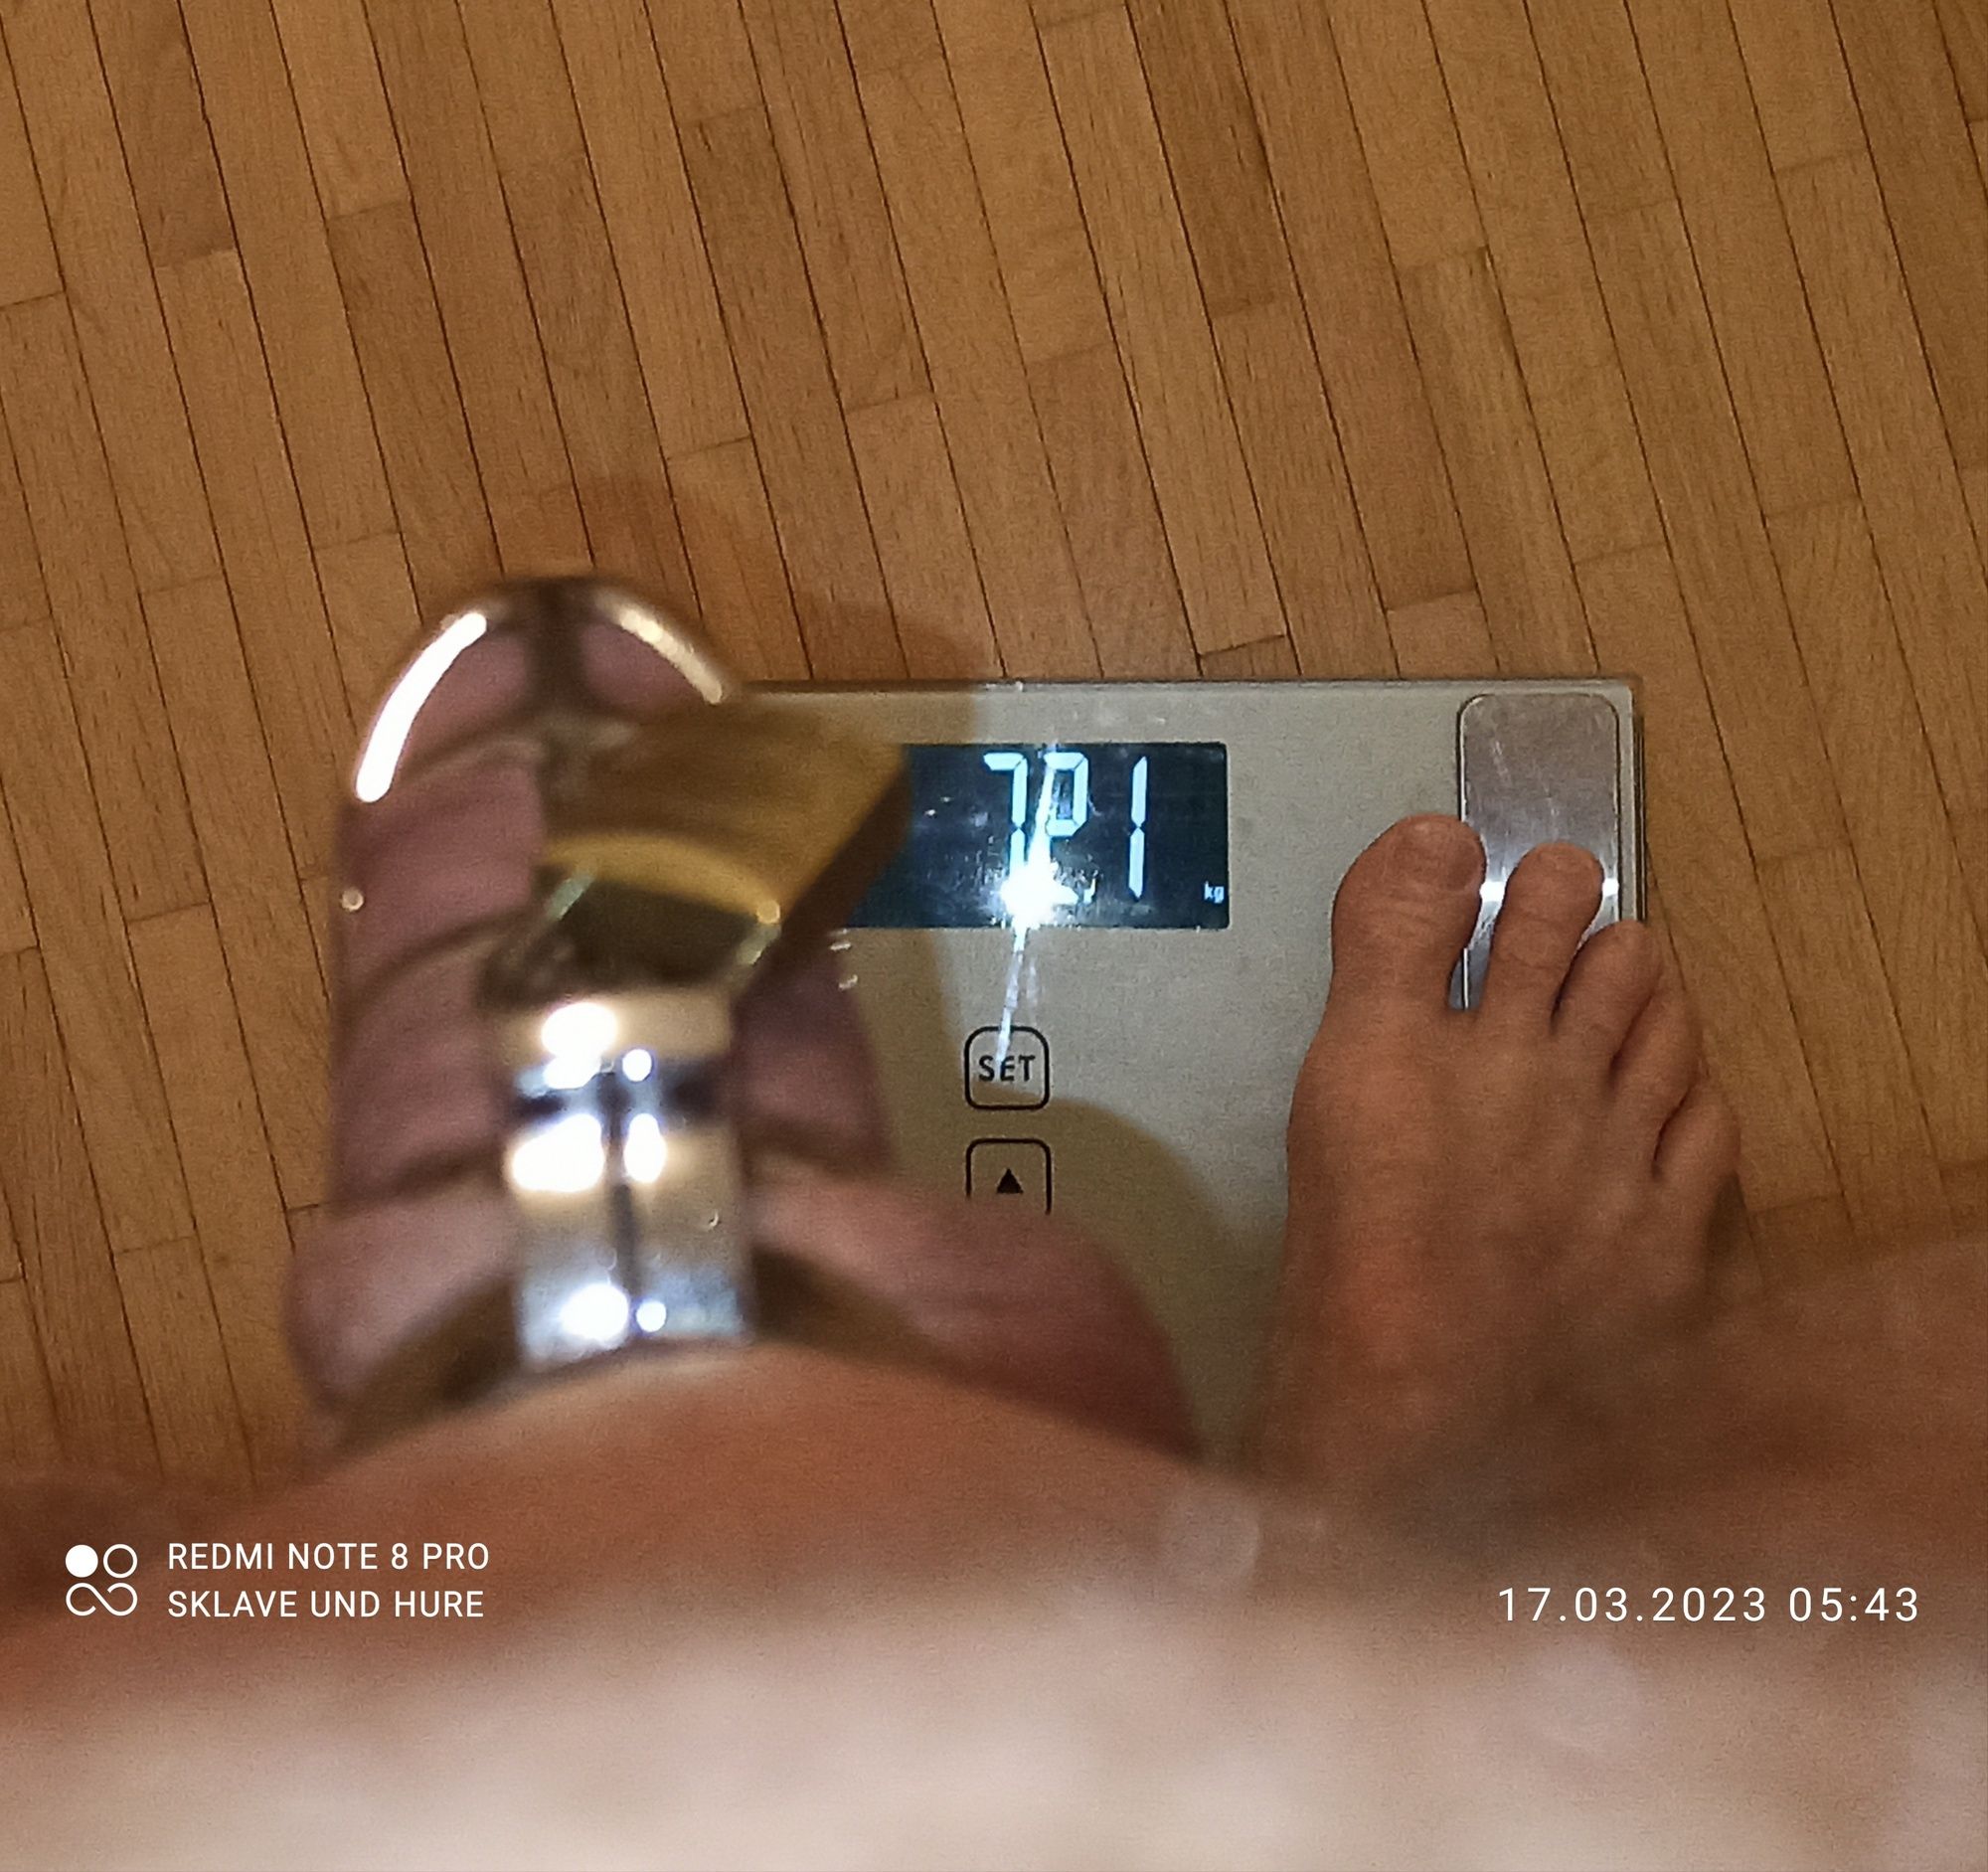 mandatory weighing and cagecheck of 17.03.2023